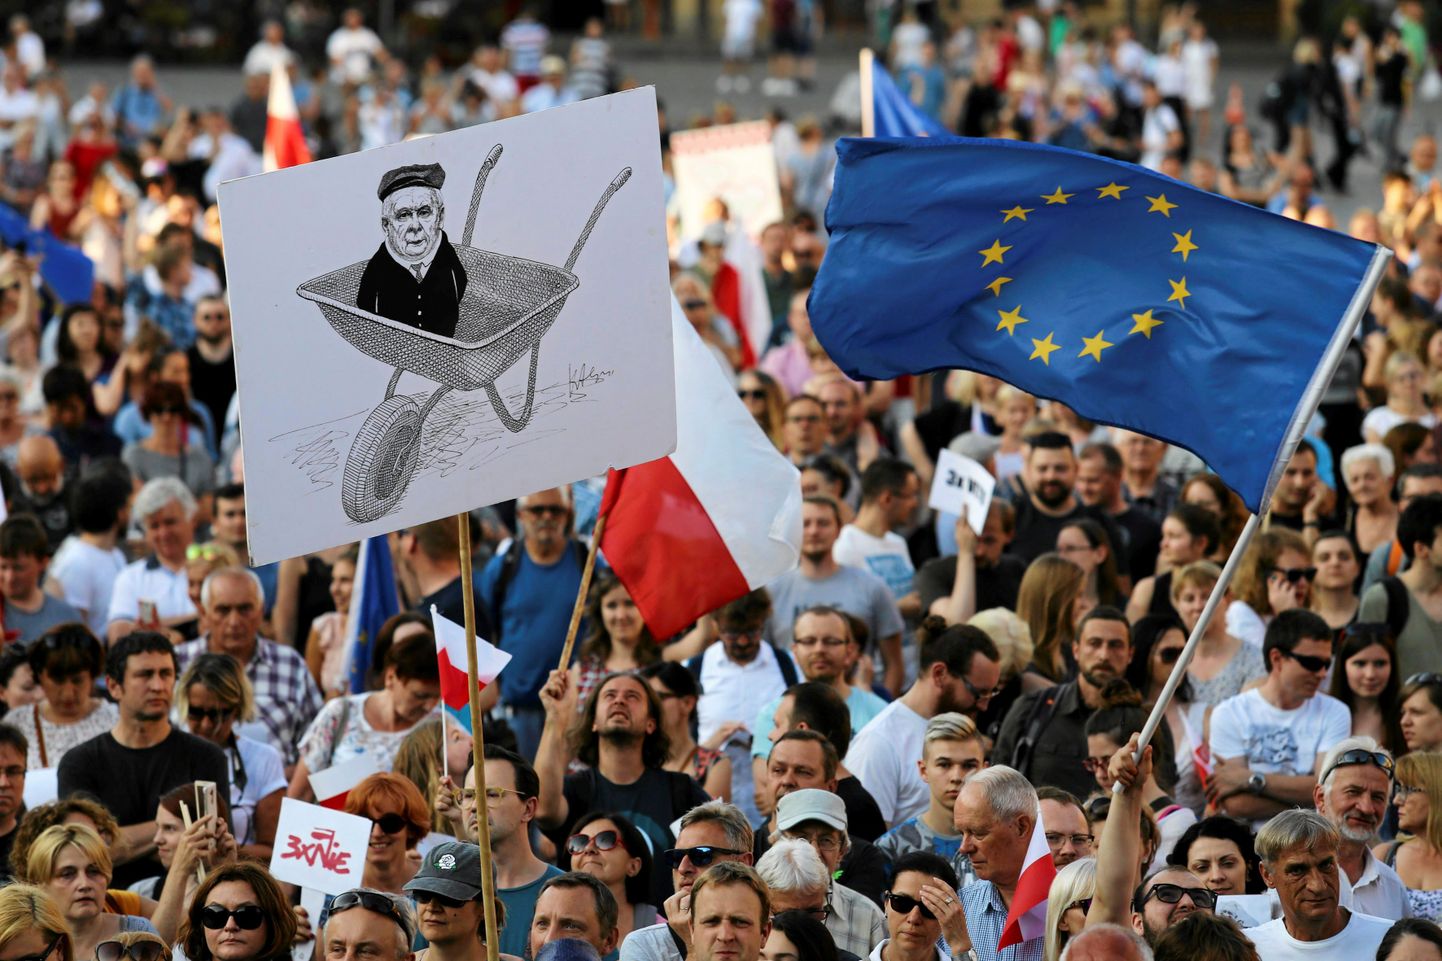 People hold a caricature of Jaroslaw Kaczynski, depicted on a wheelbarrow, as they gather during a protest against the Supreme Court legislation at the Main Square in Krakow, Poland, July 22, 2017. Agencja Gazeta/Jakub Porzycki  via REUTERS ATTENTION EDITORS - THIS IMAGE HAS BEEN SUPPLIED BY A THIRD PARTY. POLAND OUT. NO RESALES. NO ARCHIVES.